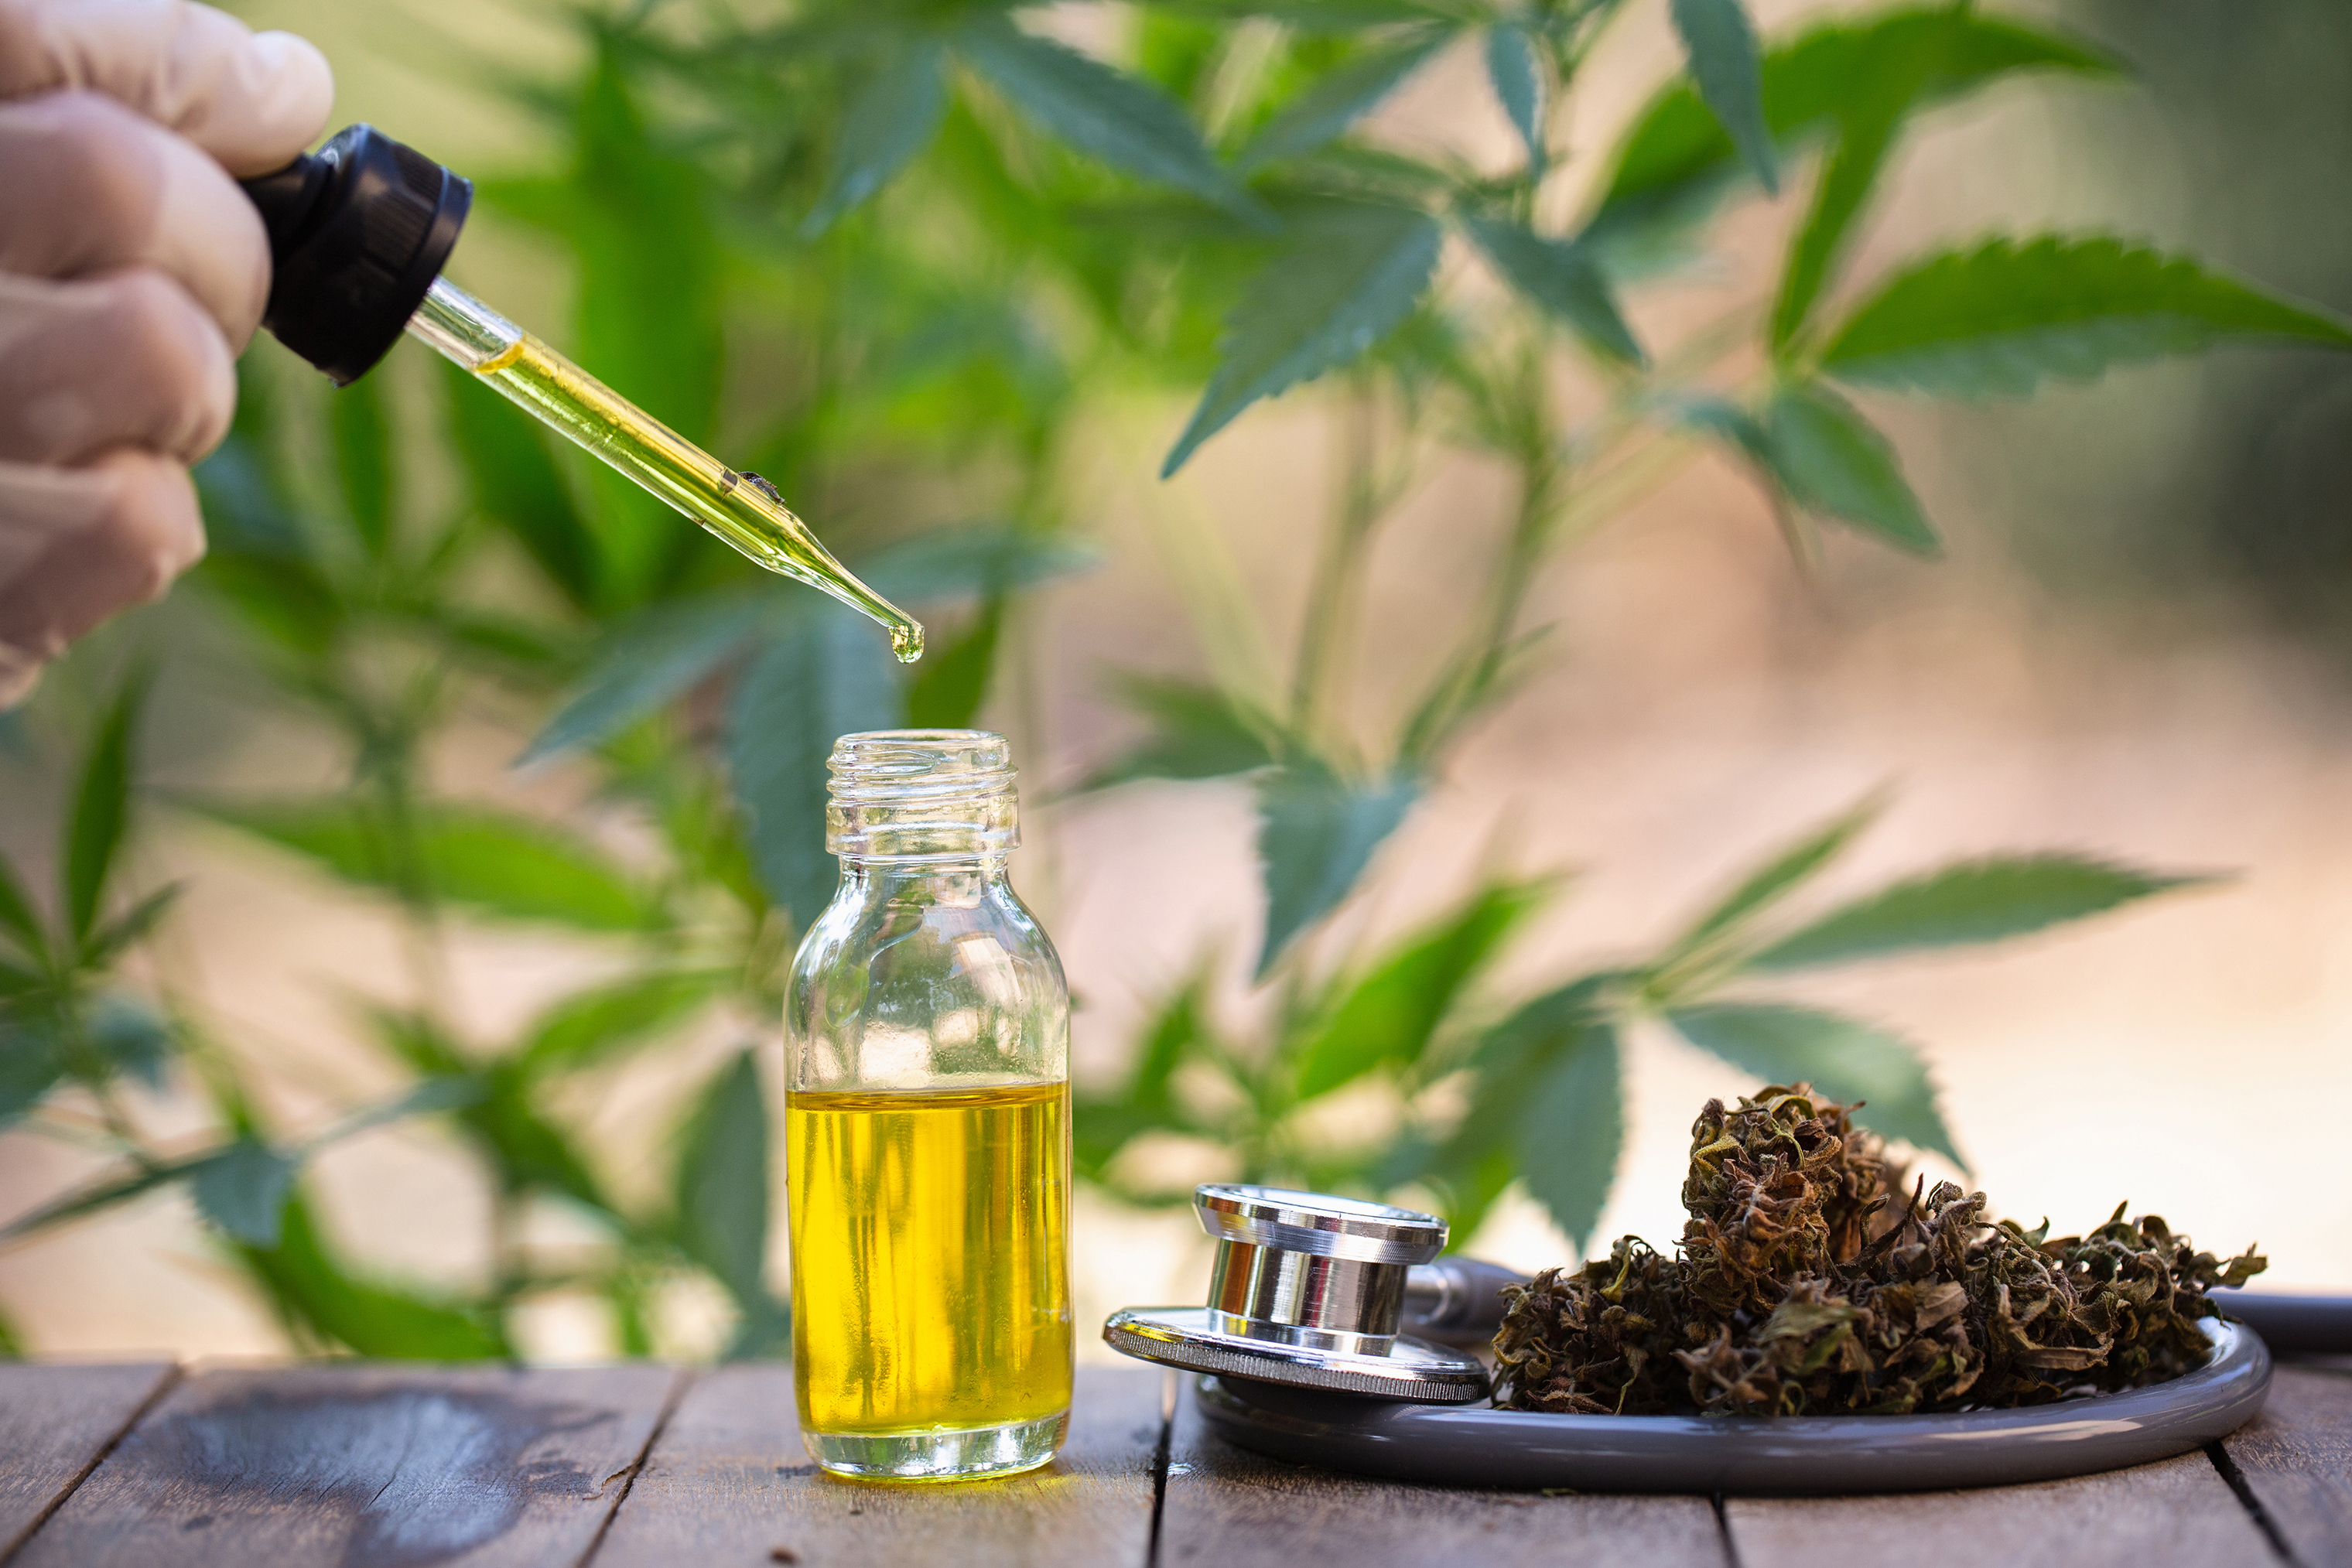 How To Tell The Purity Of Cbd Oil - Cbd|Oil|Cannabidiol|Products|View|Abstract|Effects|Hemp|Cannabis|Product|Thc|Pain|People|Health|Body|Plant|Cannabinoids|Medications|Oils|Drug|Benefits|System|Study|Marijuana|Anxiety|Side|Research|Effect|Liver|Quality|Treatment|Studies|Epilepsy|Symptoms|Gummies|Compounds|Dose|Time|Inflammation|Bottle|Cbd Oil|View Abstract|Side Effects|Cbd Products|Endocannabinoid System|Multiple Sclerosis|Cbd Oils|Cbd Gummies|Cannabis Plant|Hemp Oil|Cbd Product|Hemp Plant|United States|Cytochrome P450|Many People|Chronic Pain|Nuleaf Naturals|Royal Cbd|Full-Spectrum Cbd Oil|Drug Administration|Cbd Oil Products|Medical Marijuana|Drug Test|Heavy Metals|Clinical Trial|Clinical Trials|Cbd Oil Side|Rating Highlights|Wide Variety|Animal Studies